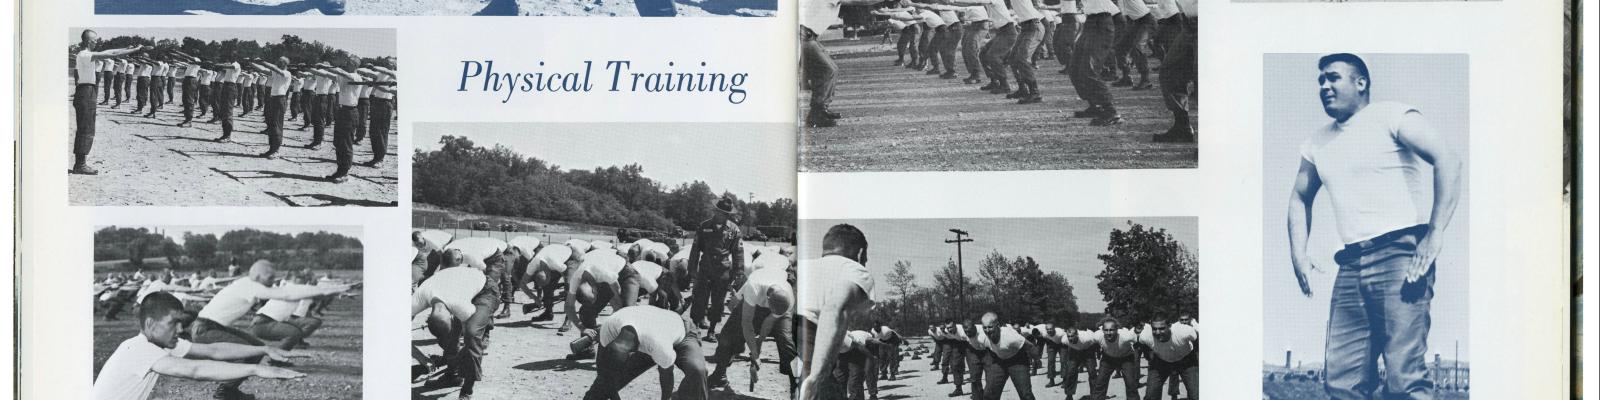 physical training from united states army training center, armor 1967